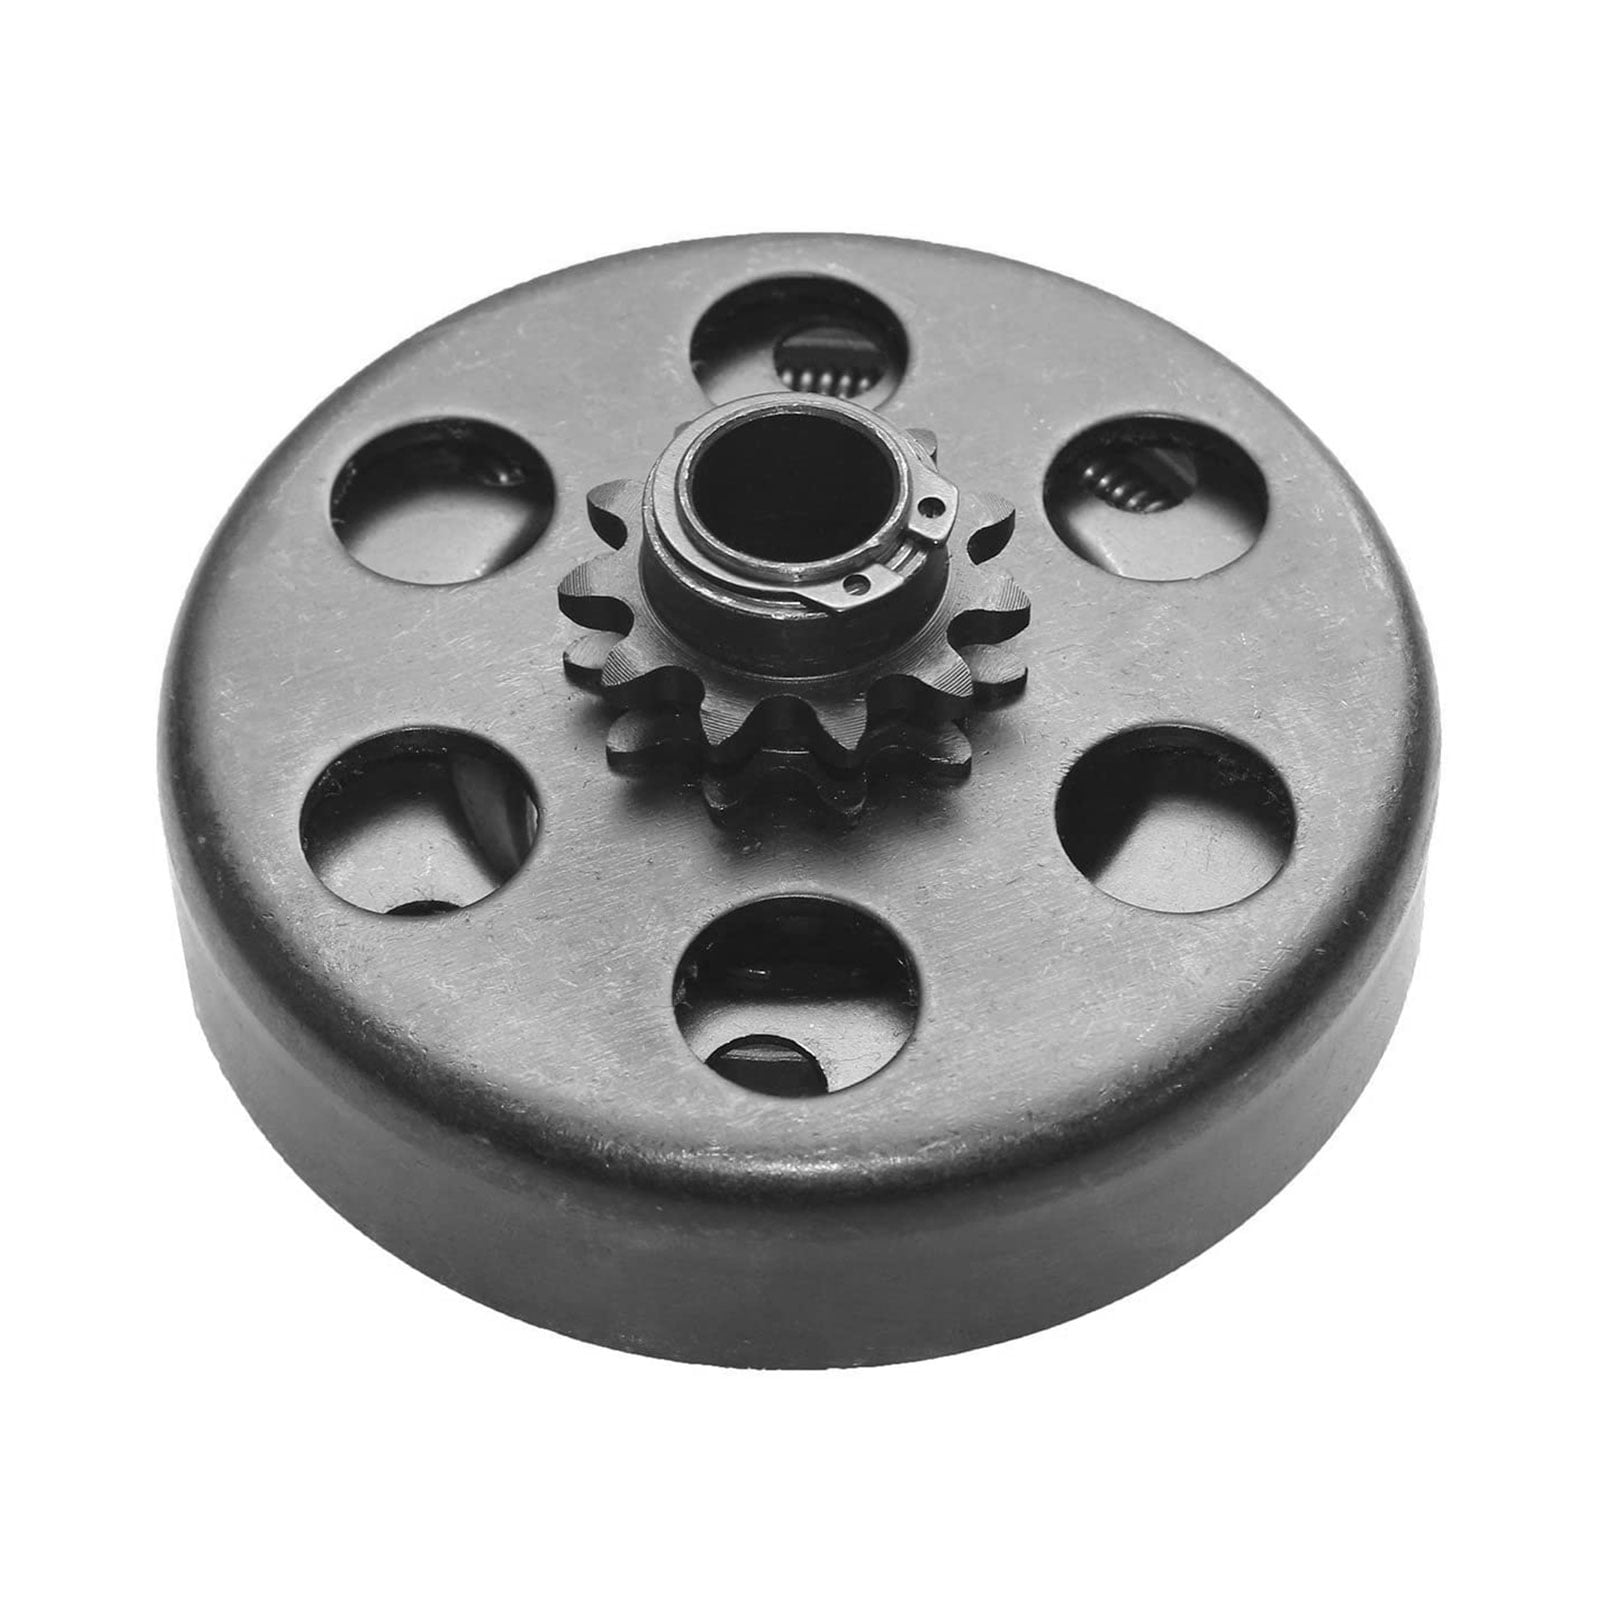 Details about   Minibike Go Kart Clutch 3/4" Bore 10 Tooth for #40/41/420 Chain 6.5HP 212cc 